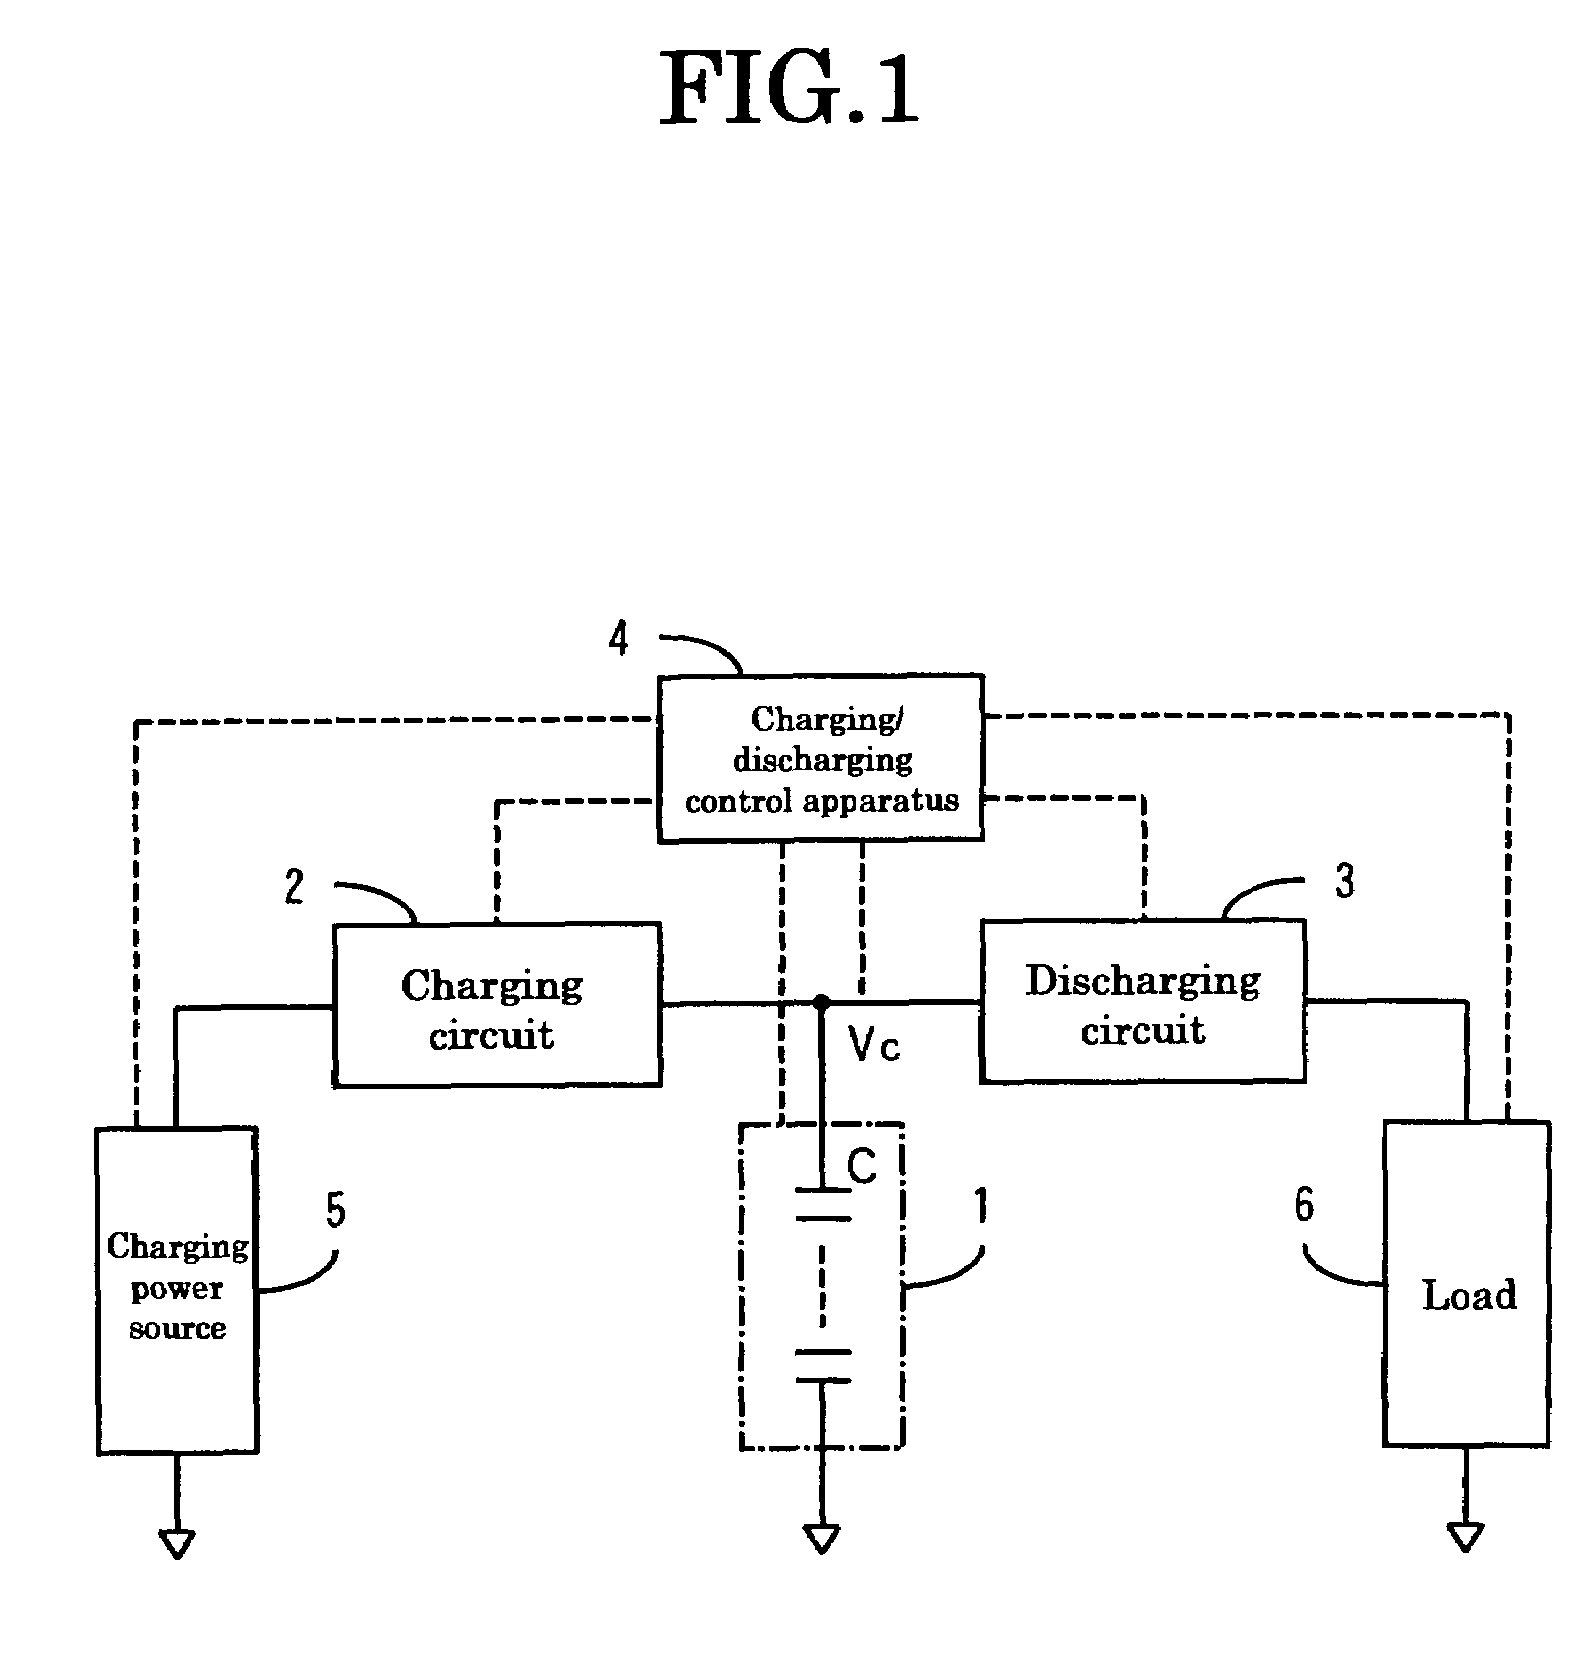 Capacitor power source and charging/discharging control apparatus therefor